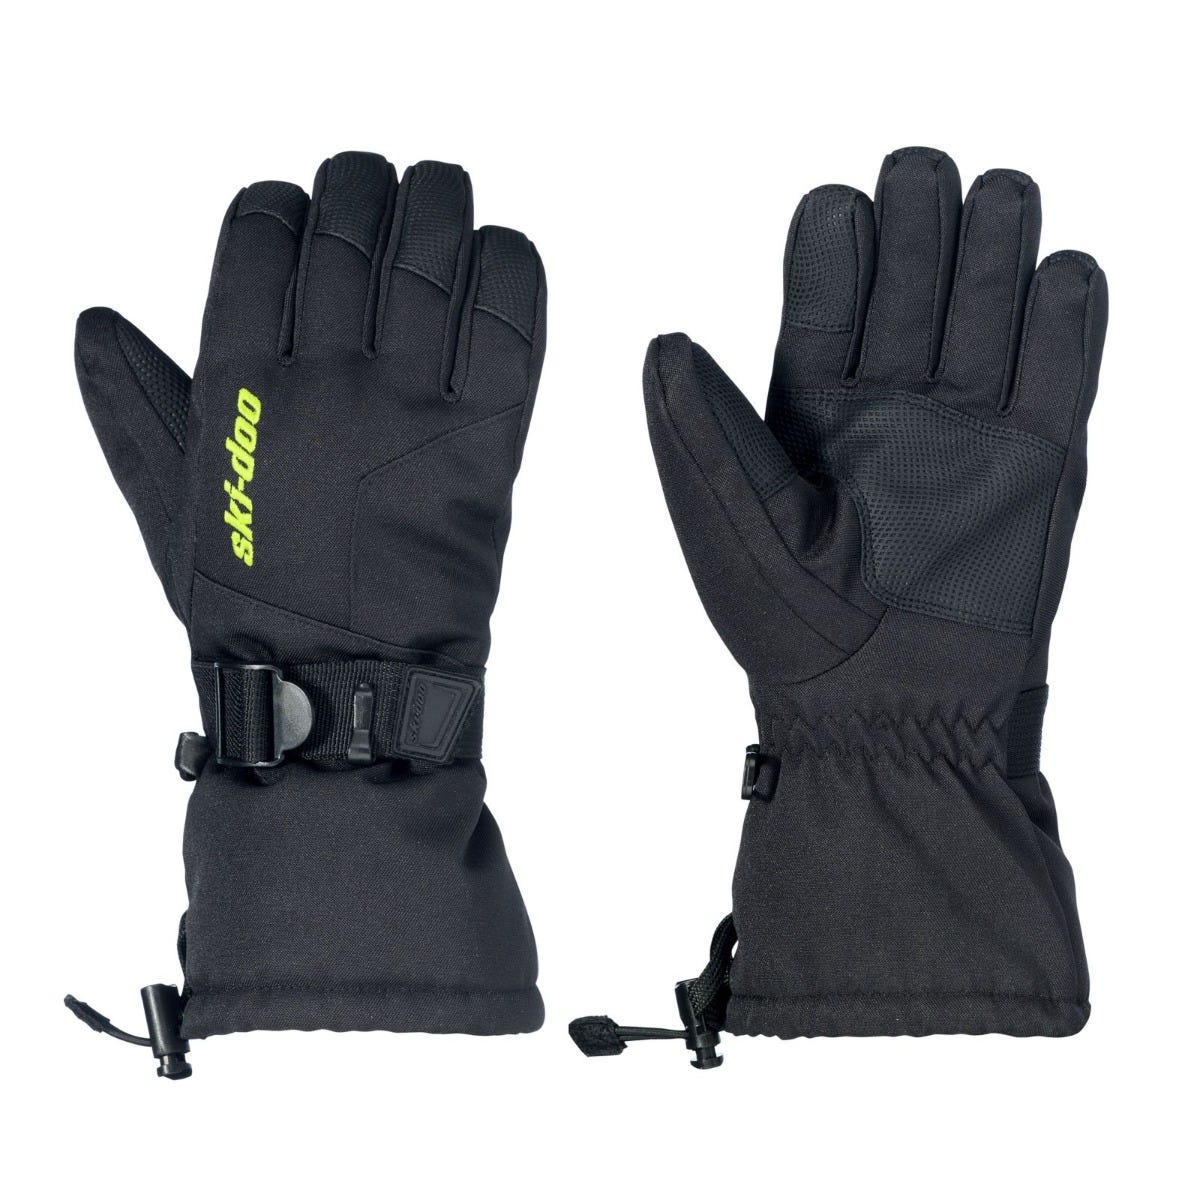 Ski-Doo Youth Particle Gloves